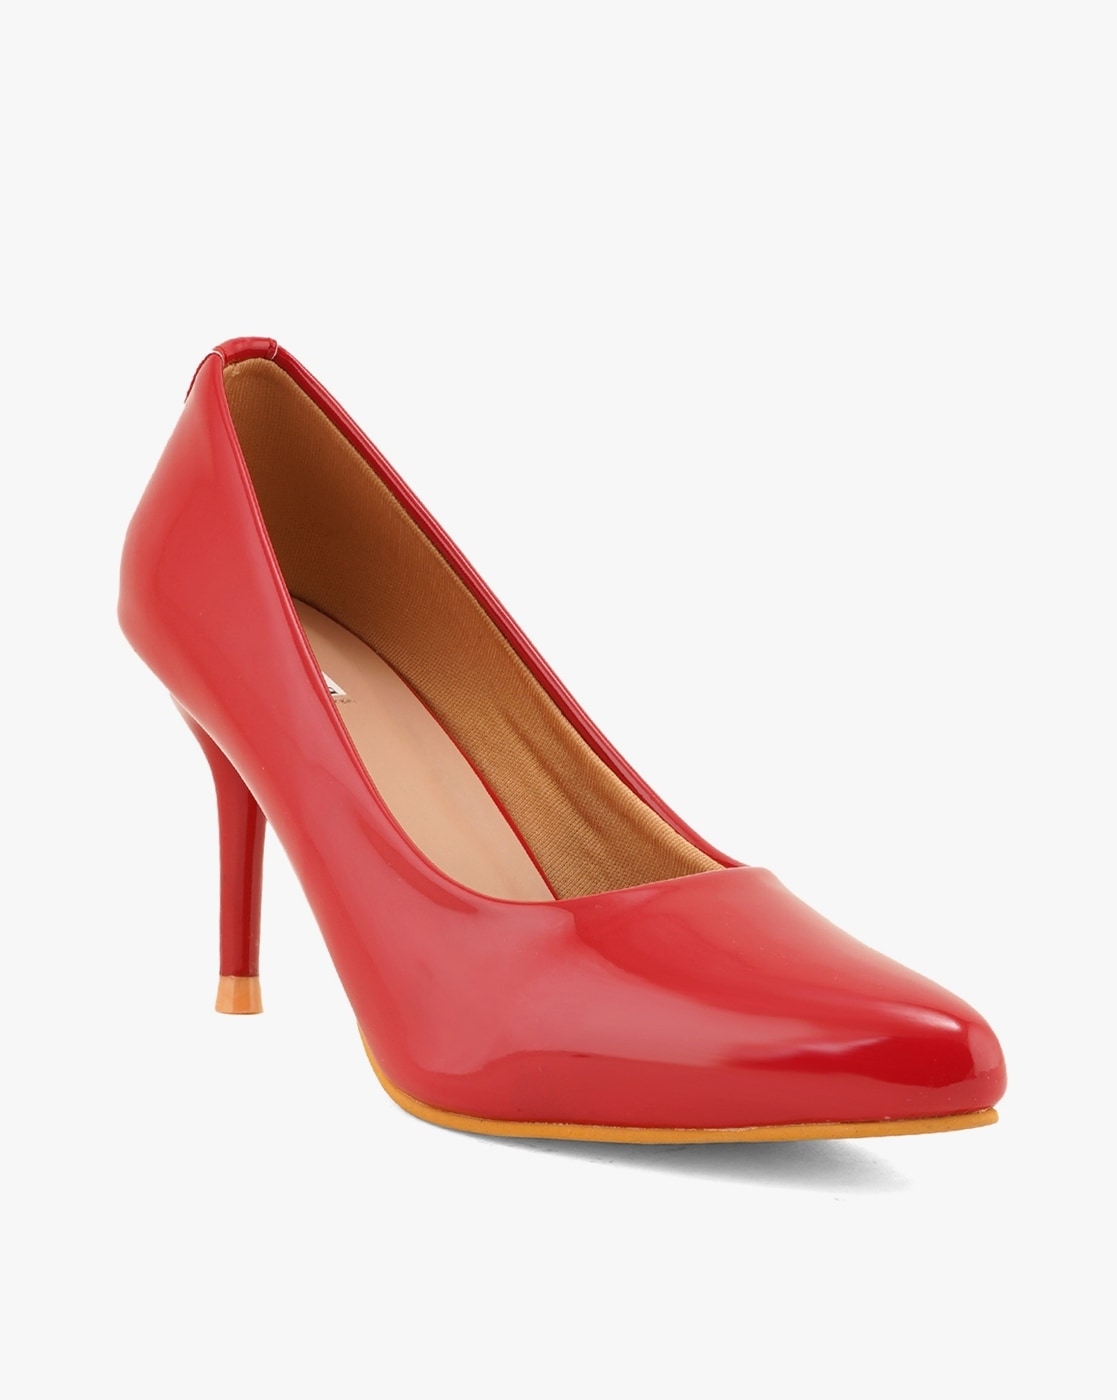 Lib Pointed Toe 5 inches Stiletto Heels Leather Crocodile Embossed Classic  Pumps - Red in Sexy Heels & Platforms - $75.59